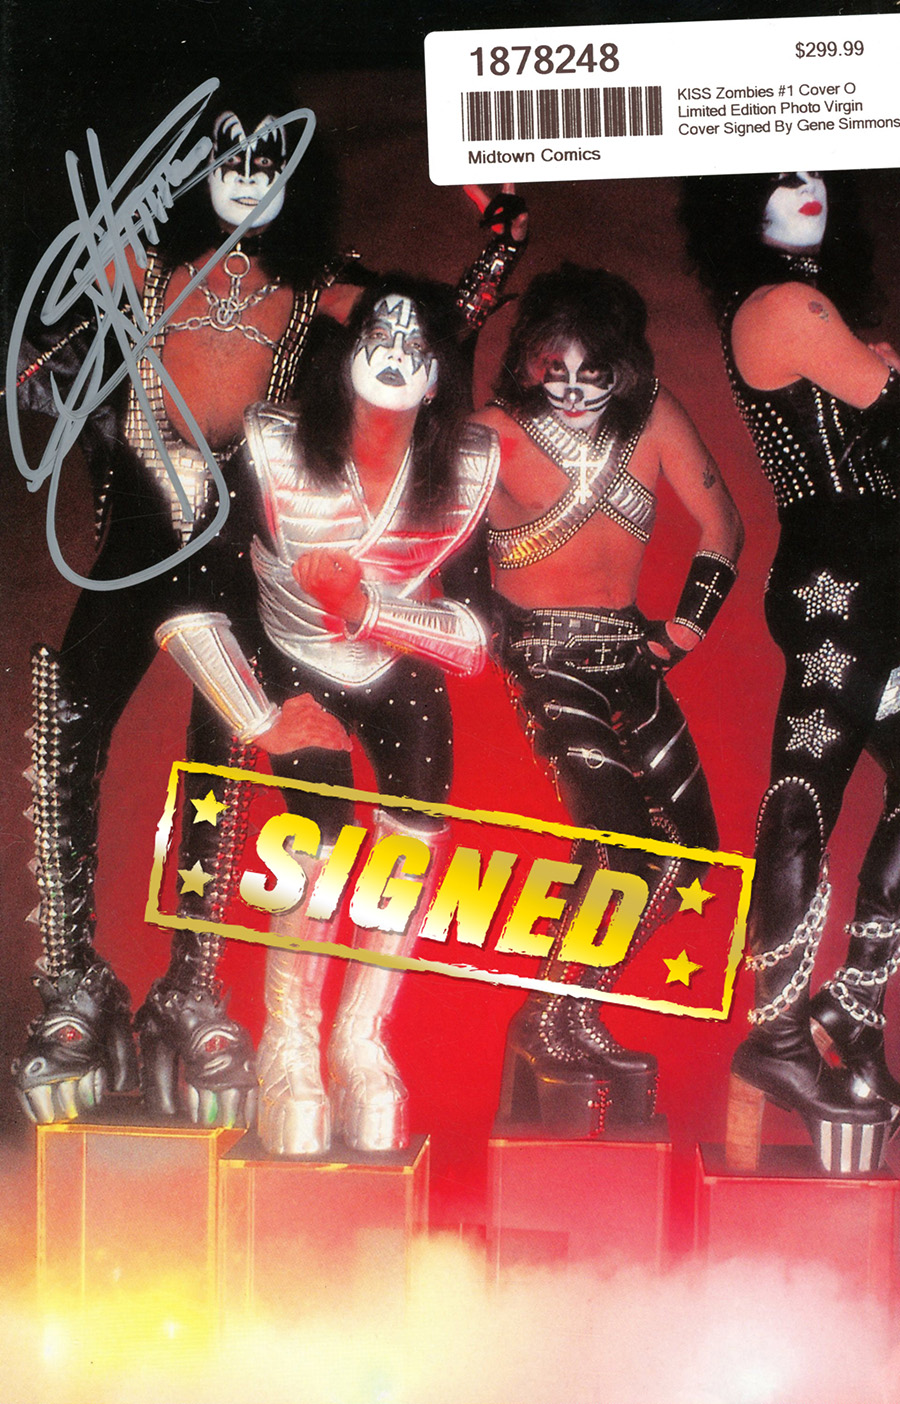 KISS Zombies #1 Cover O Limited Edition Photo Virgin Cover Signed By Gene Simmons